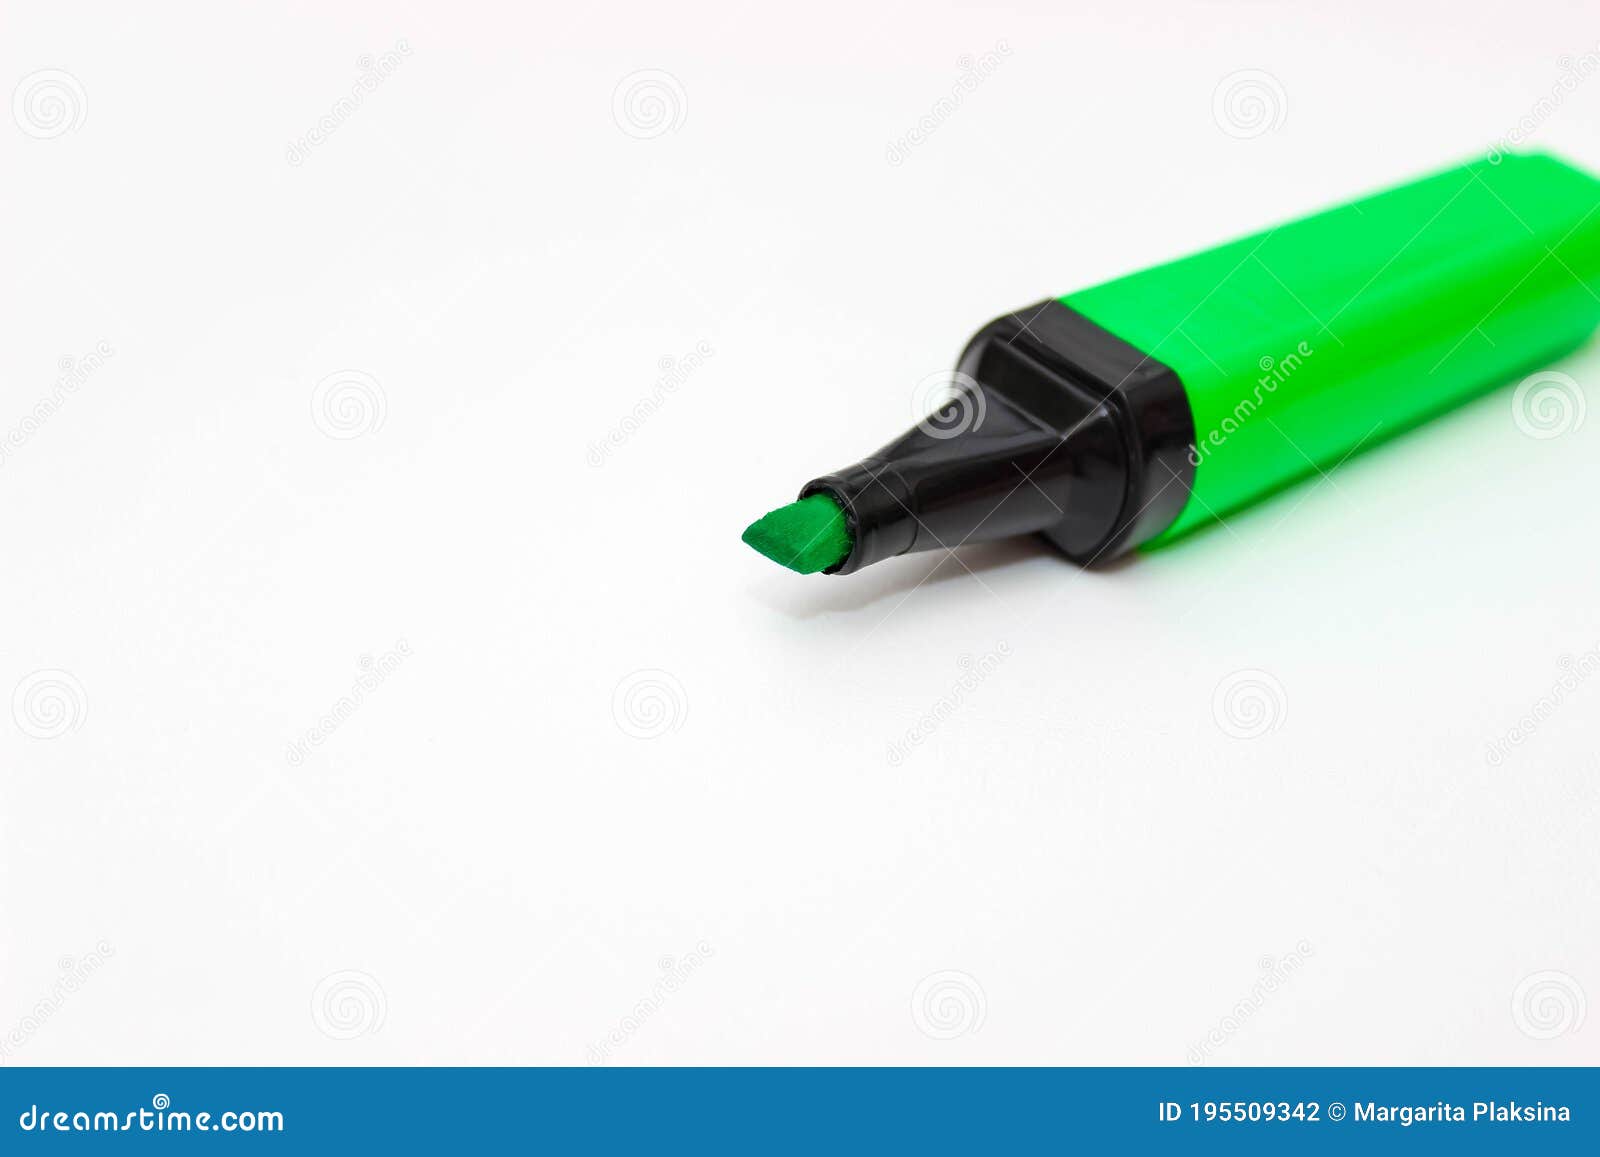 Banquet tension Absay Green Marker Text Highlighter on a White Background Stock Photo - Image of  marking, paint: 195509342